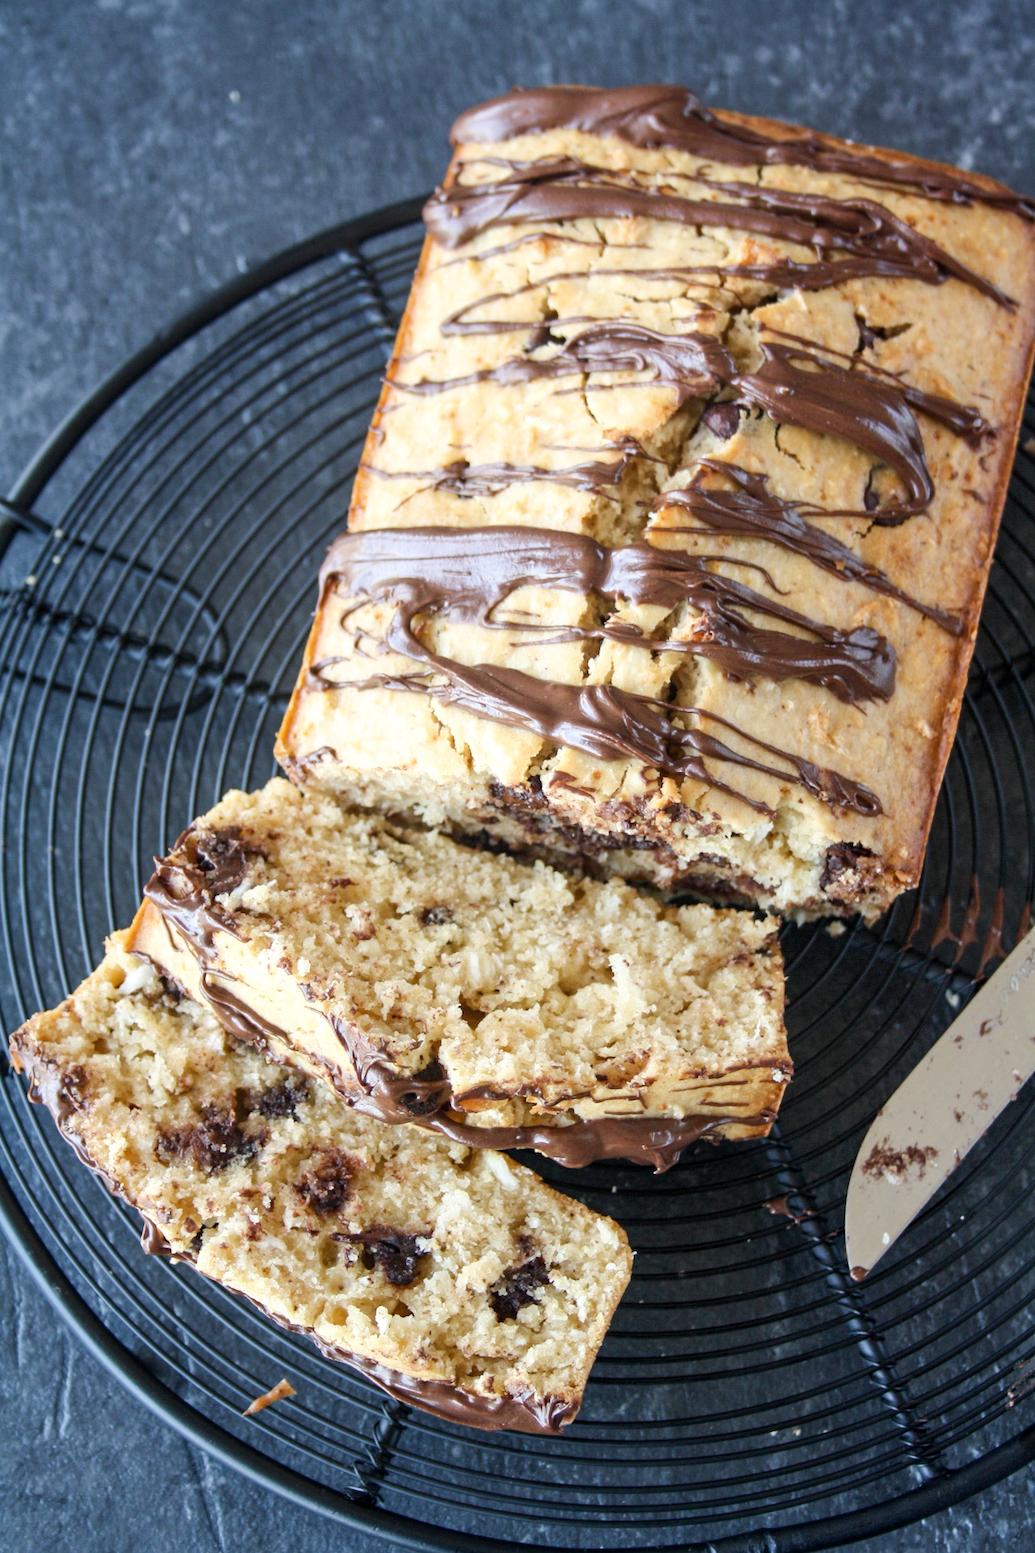  Sweetness meets crunch in this coconut and chocolate chip bread! 🥥🍫